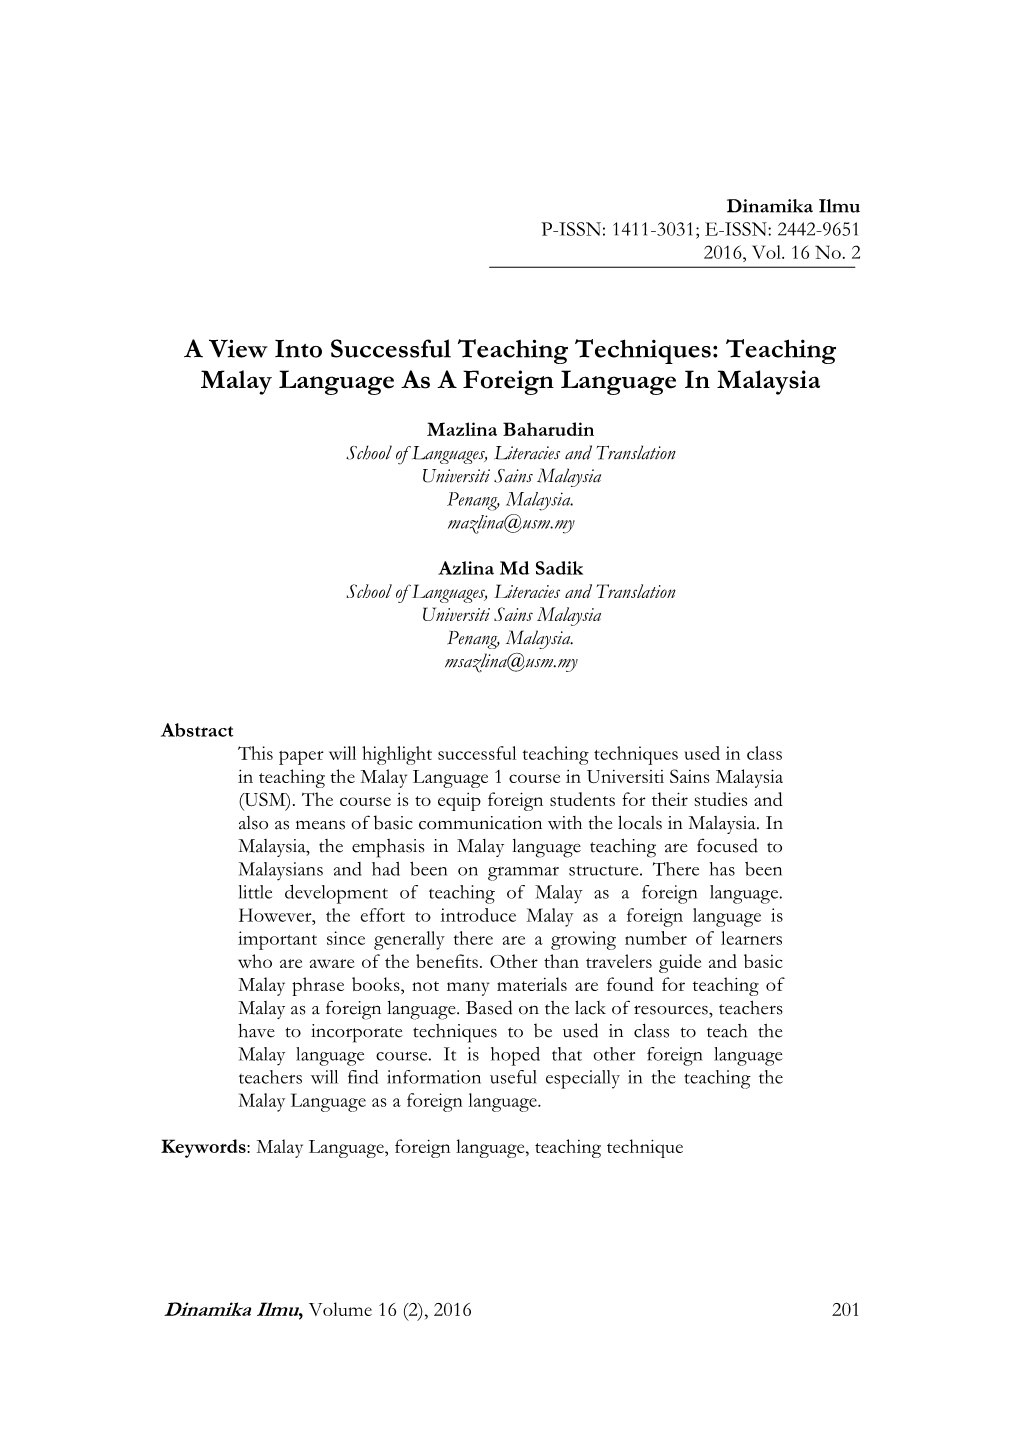 Teaching Malay Language As a Foreign Language in Malaysia